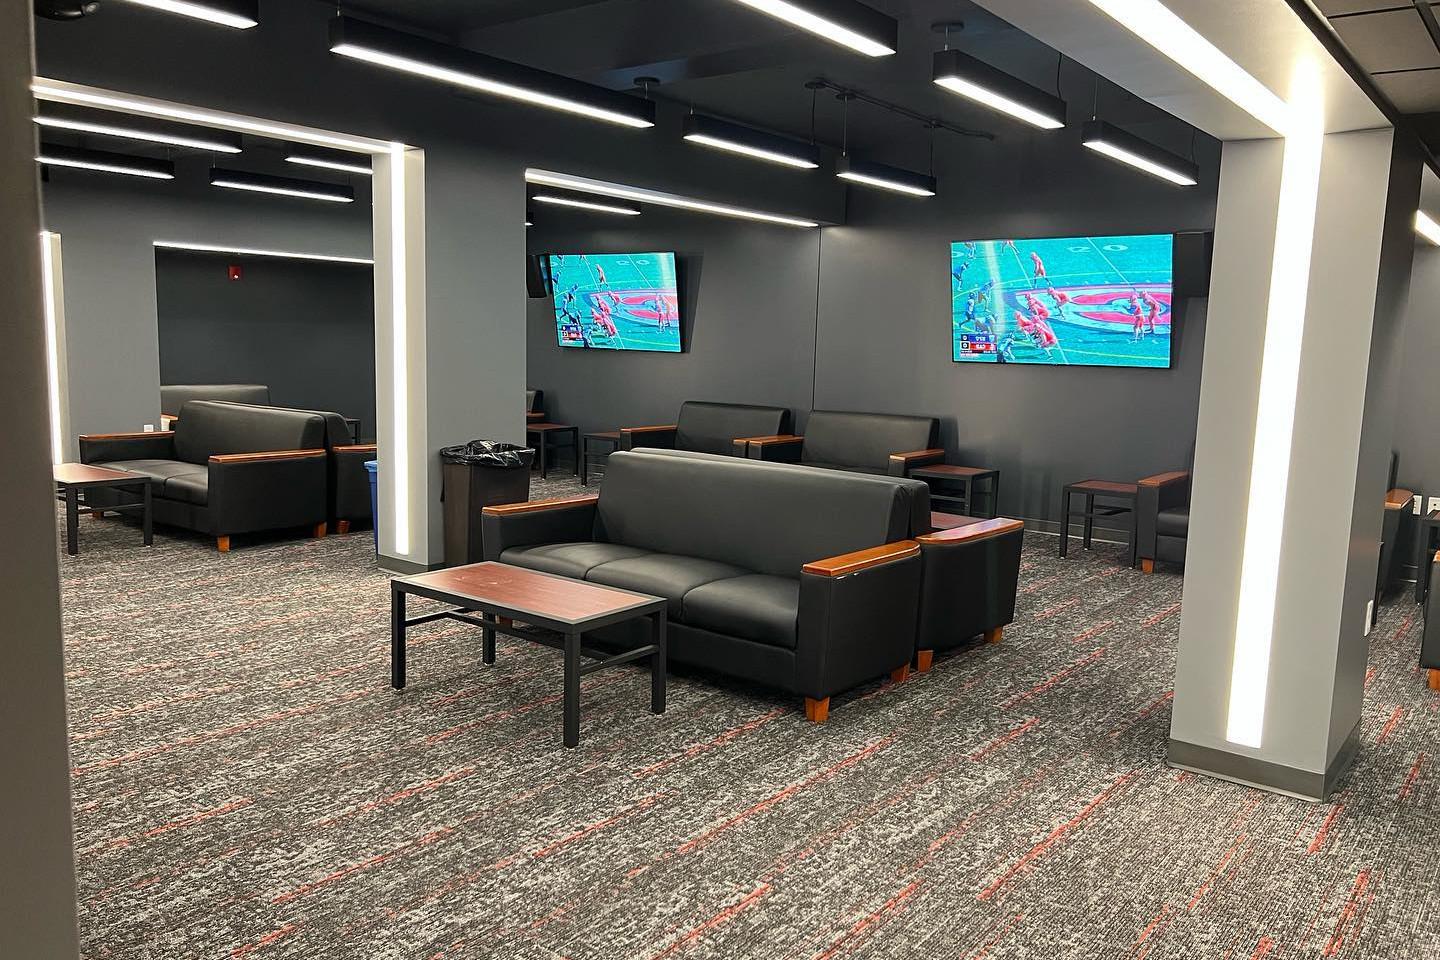 All Carthage students are welcome to visit the Esports Arena to play games, watch movies, or hang...